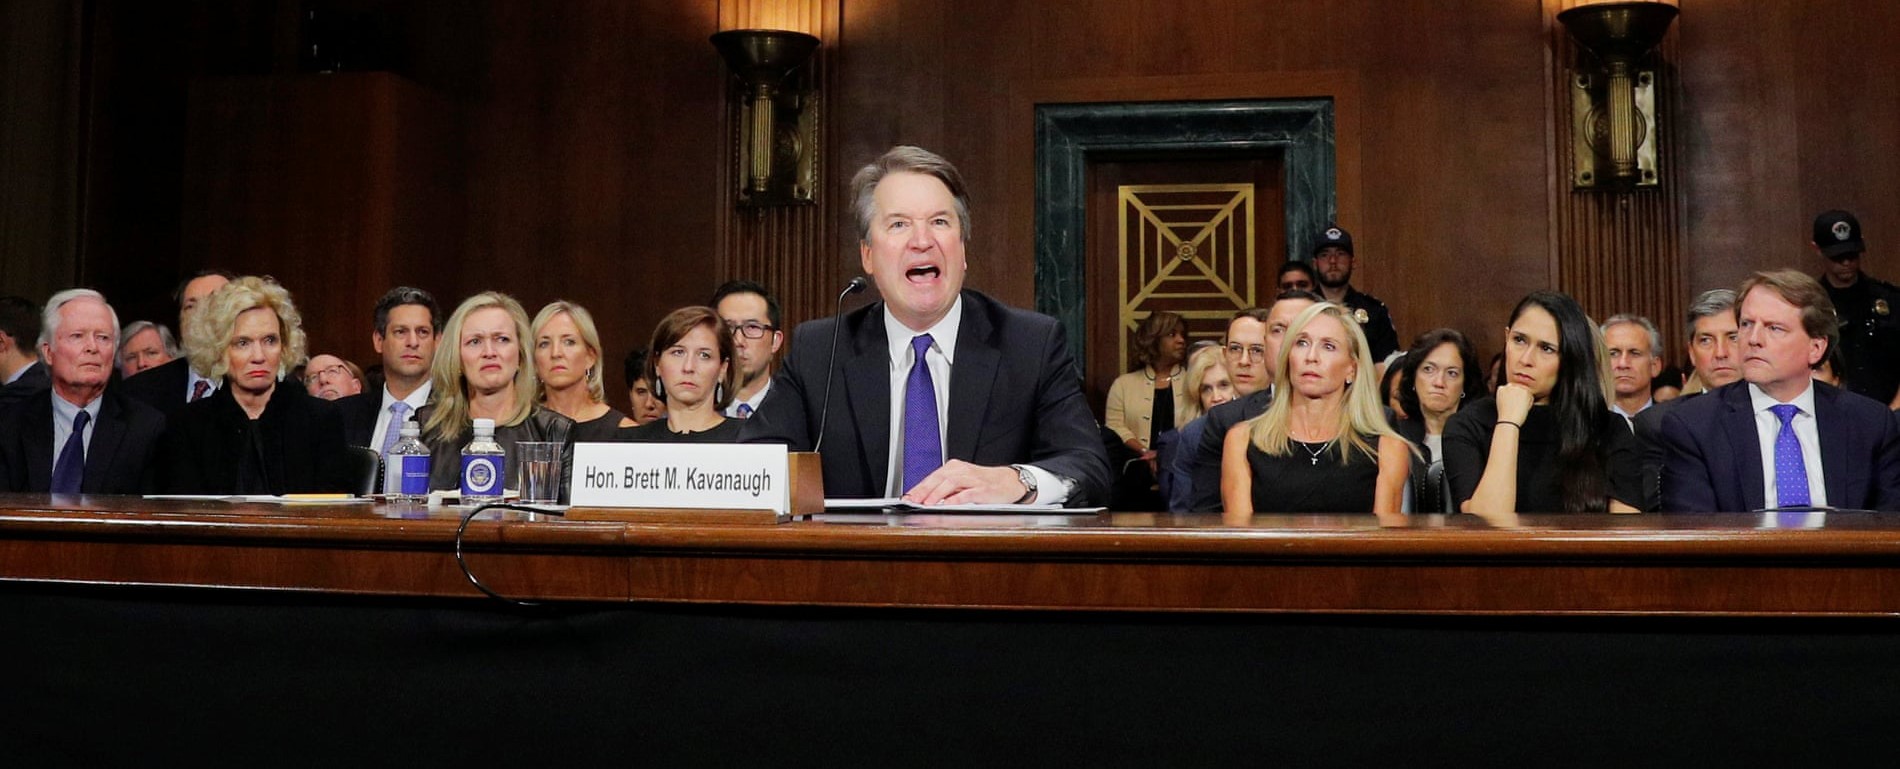 Kavanaugh looking angry while scowling women look on